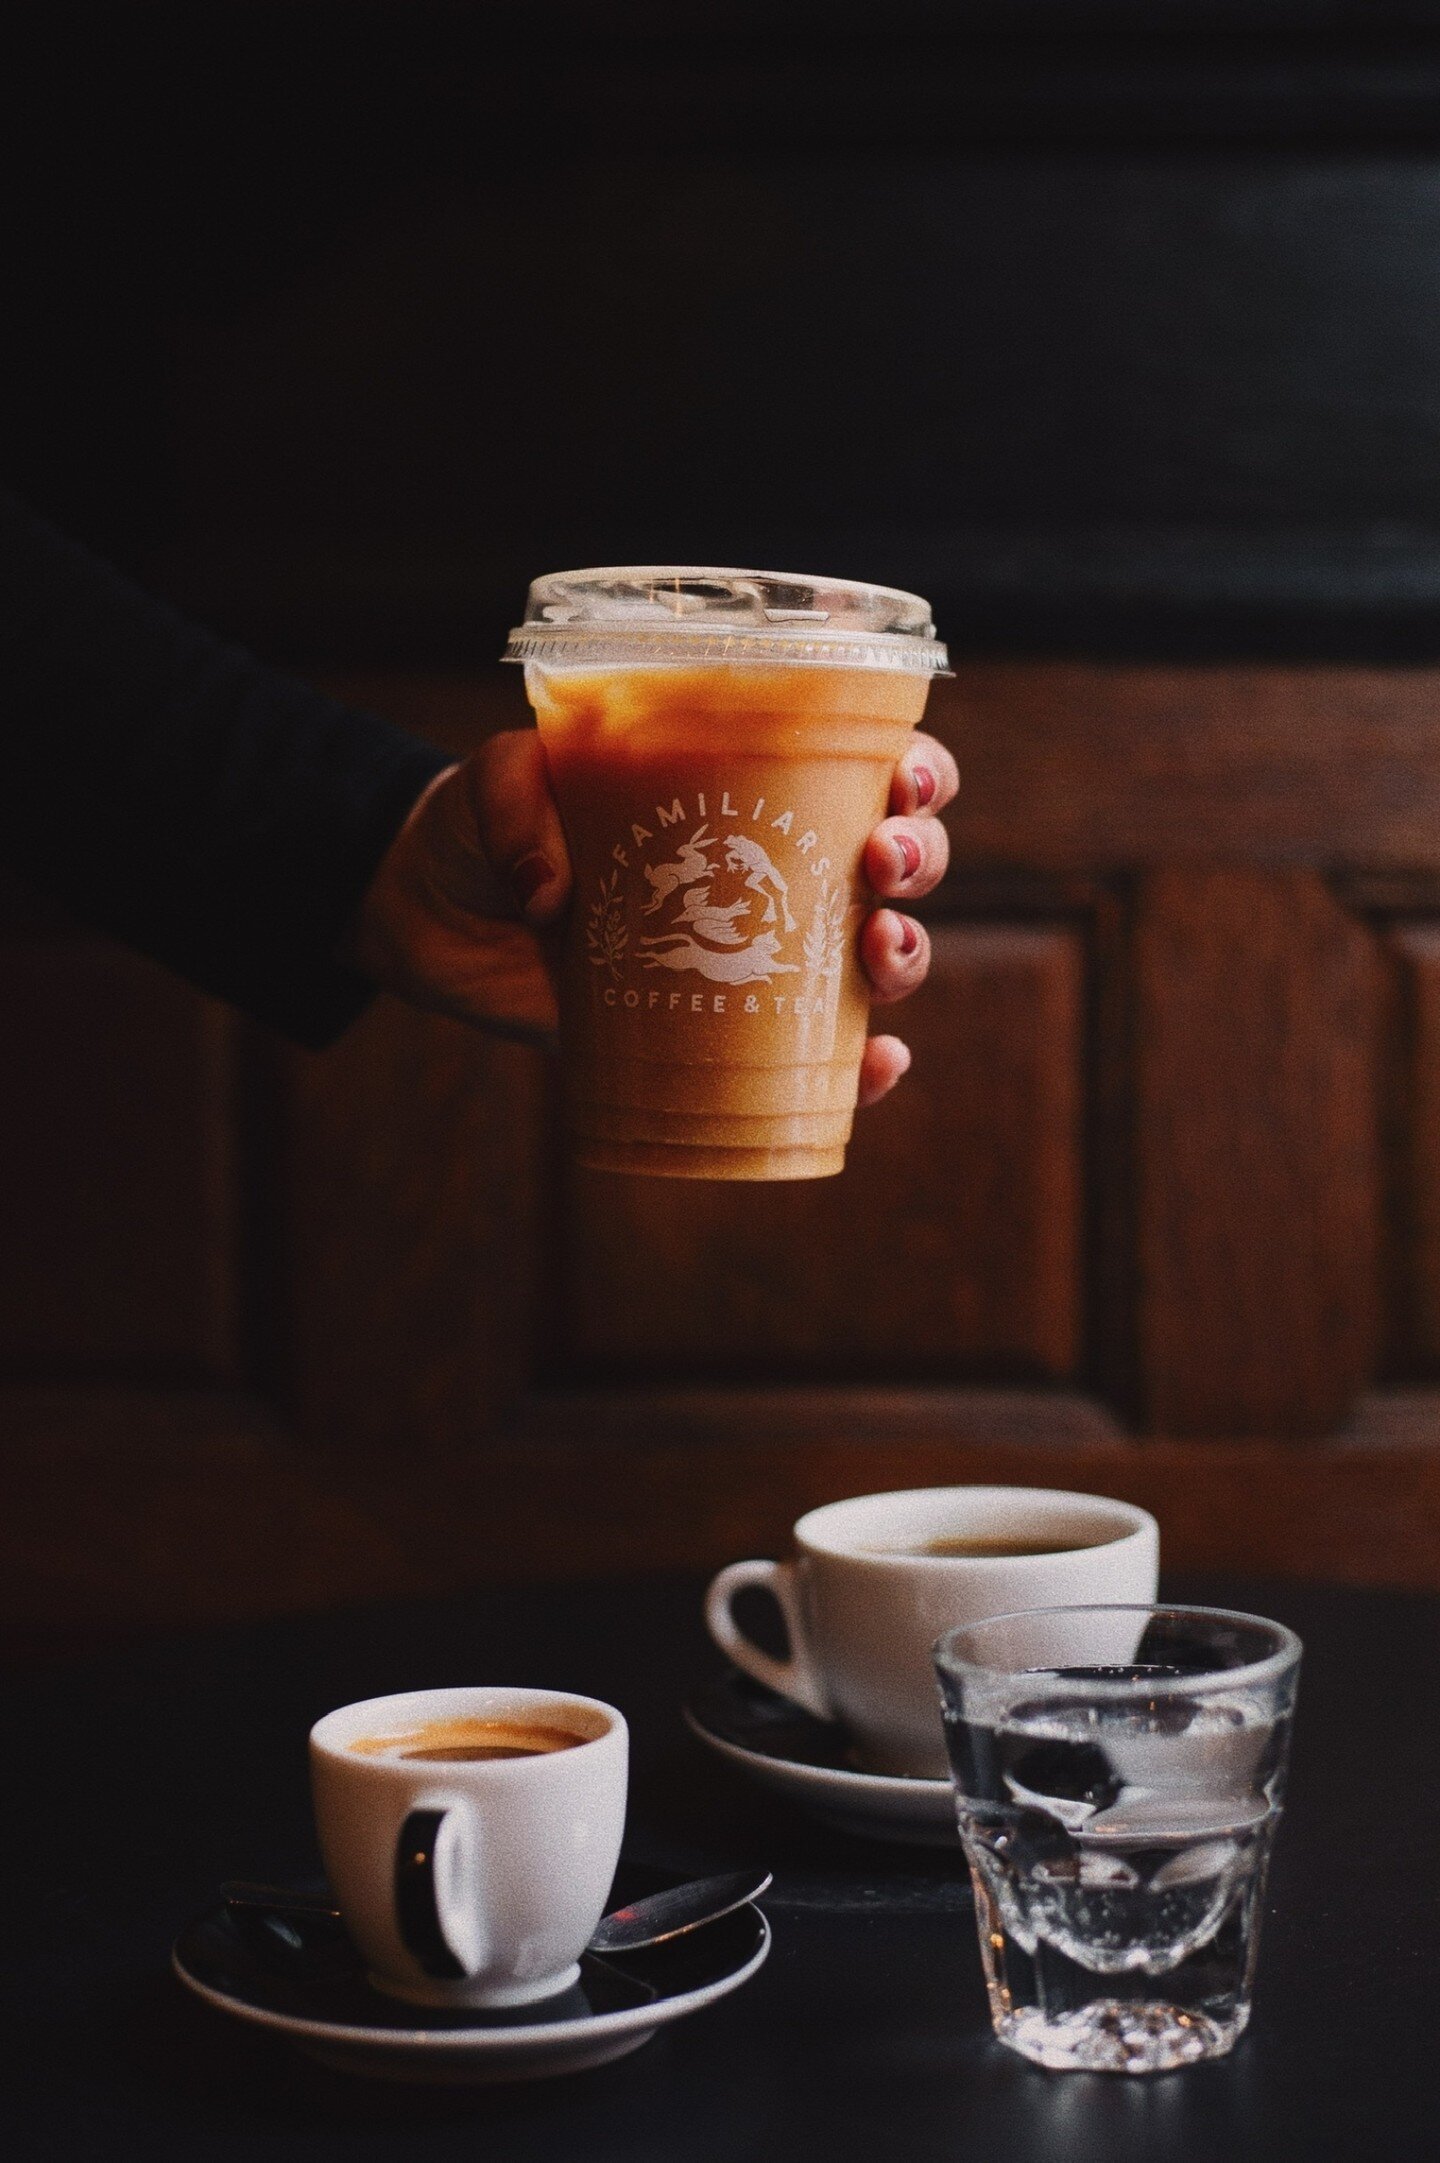 Sometimes one coffee just isn&rsquo;t enough, ya know? 
&bull;
We get it, and we&rsquo;ve got you covered. Grab that cold brew to go on your way out, we won&rsquo;t judge.
&bull;
Here daily 8-6!
📷 @emmacolwellphoto